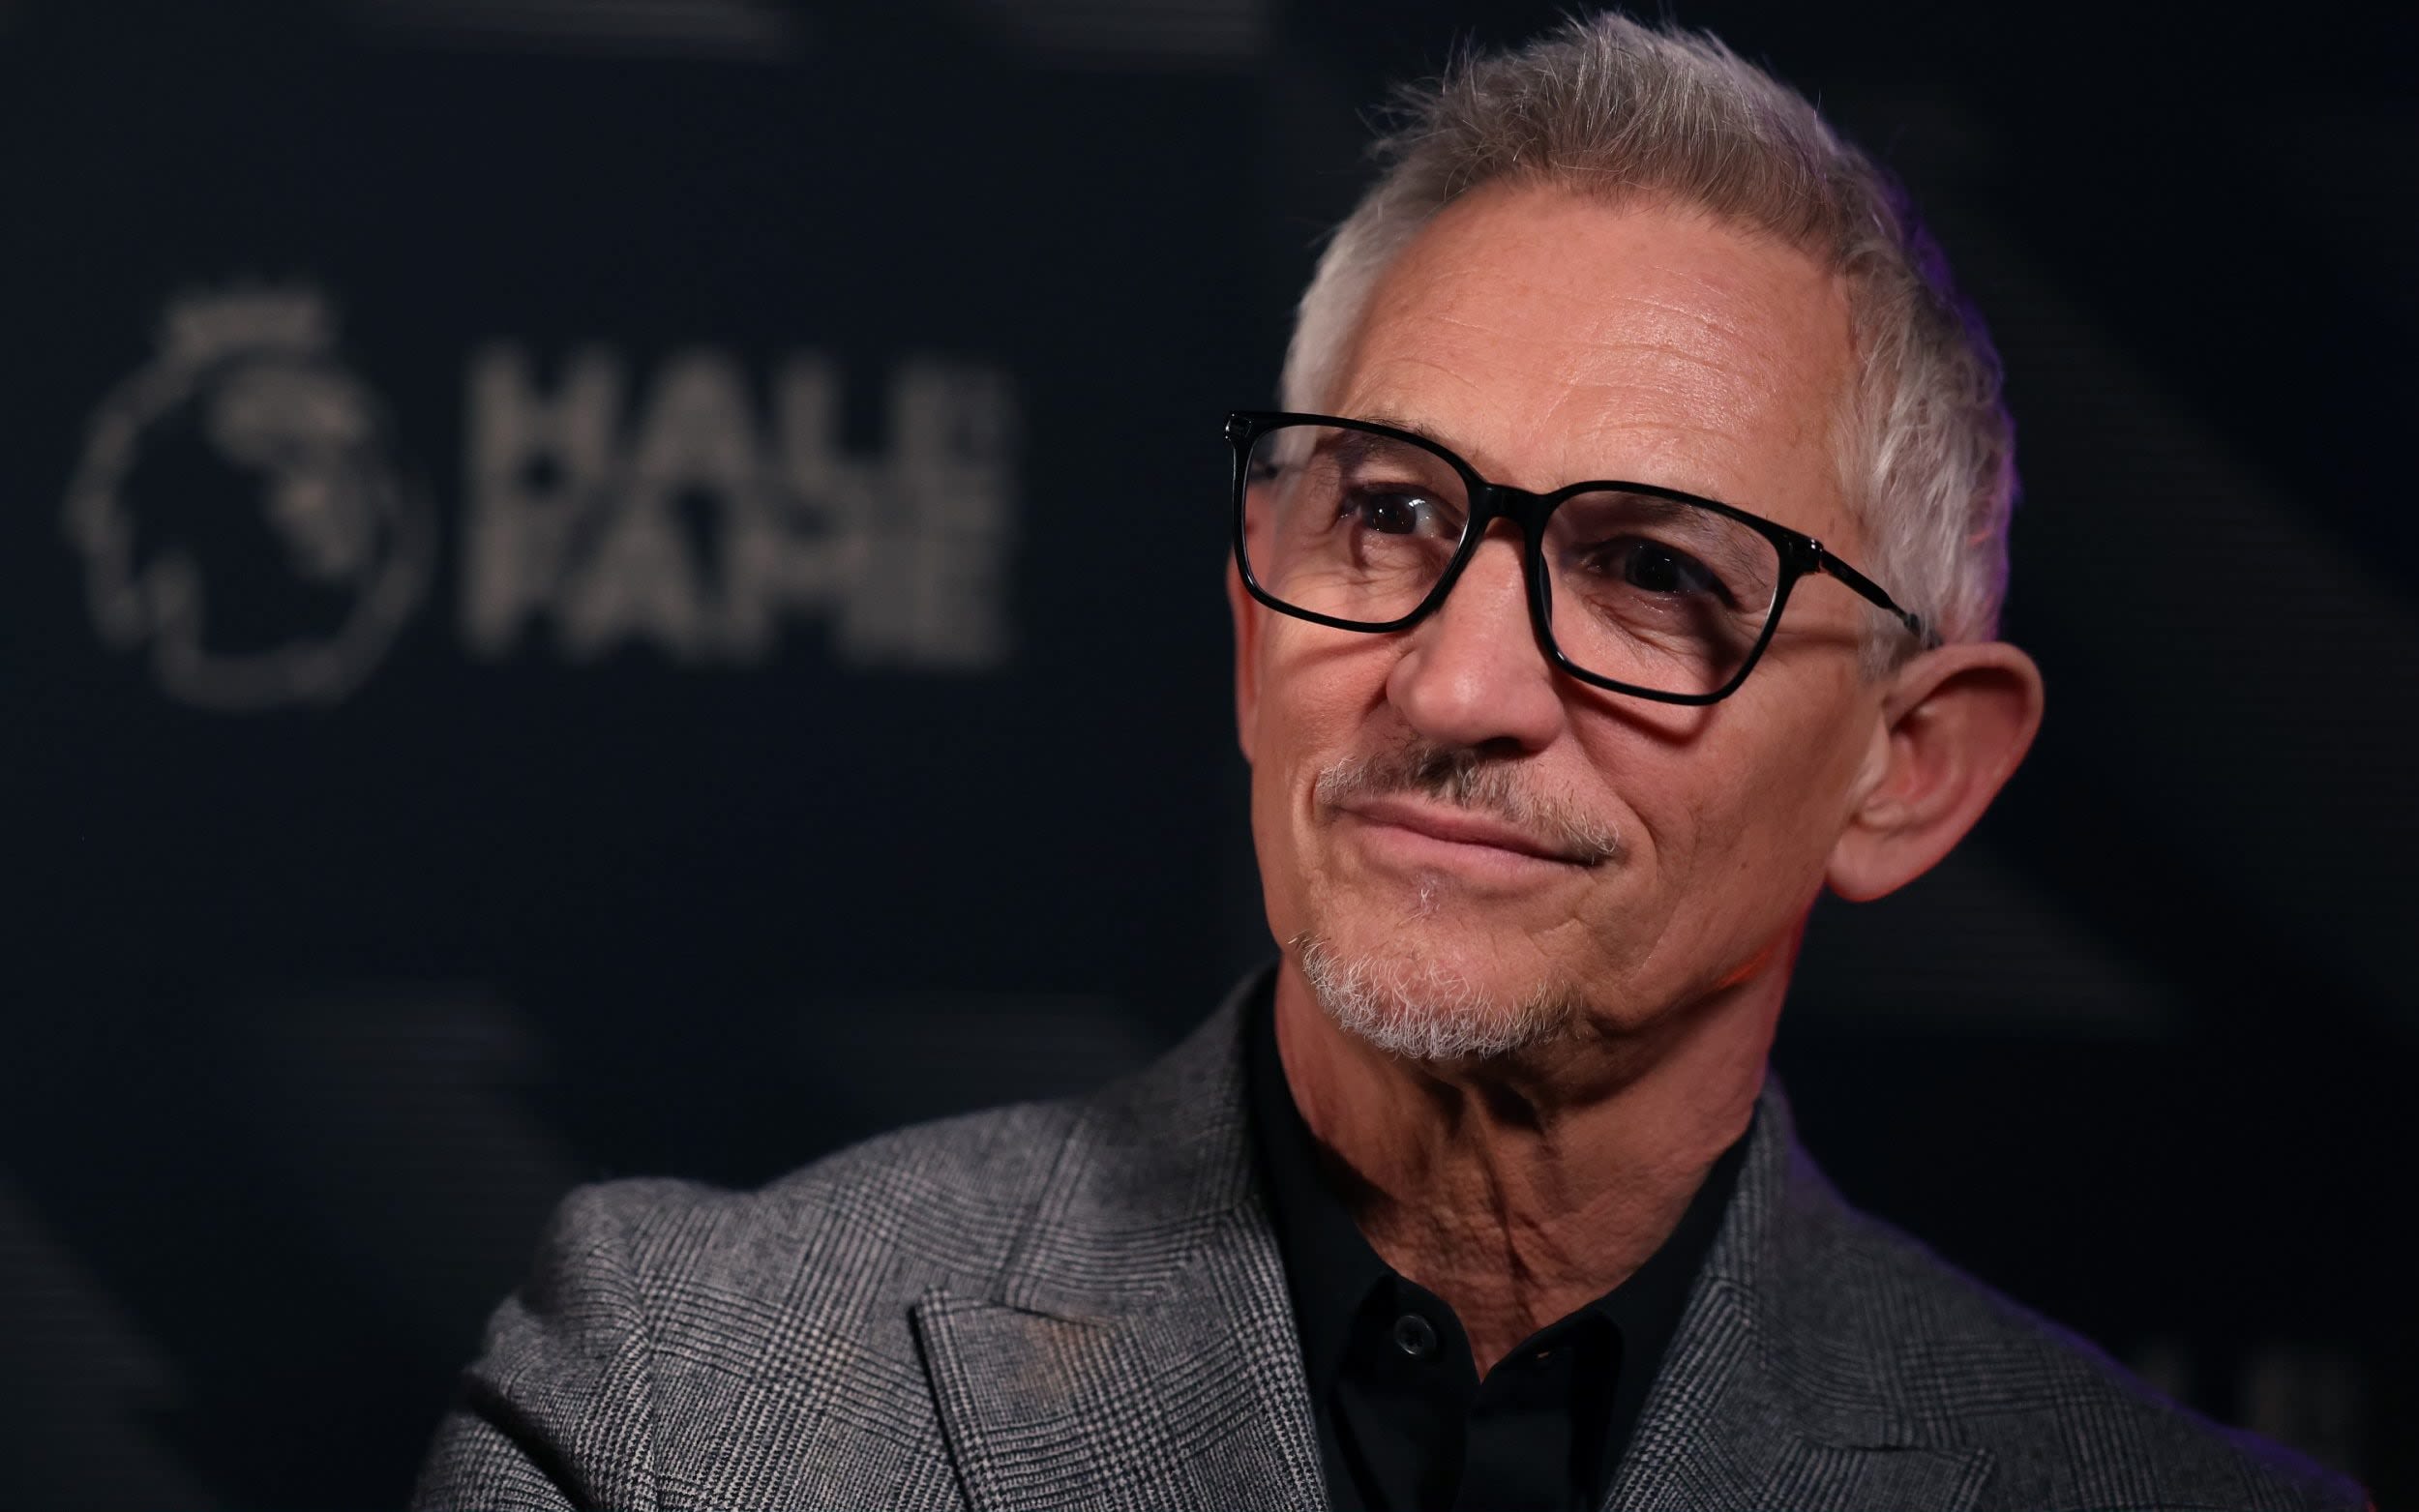 Gary Lineker’s company warns over ‘disastrous’ BBC podcast adverts plan